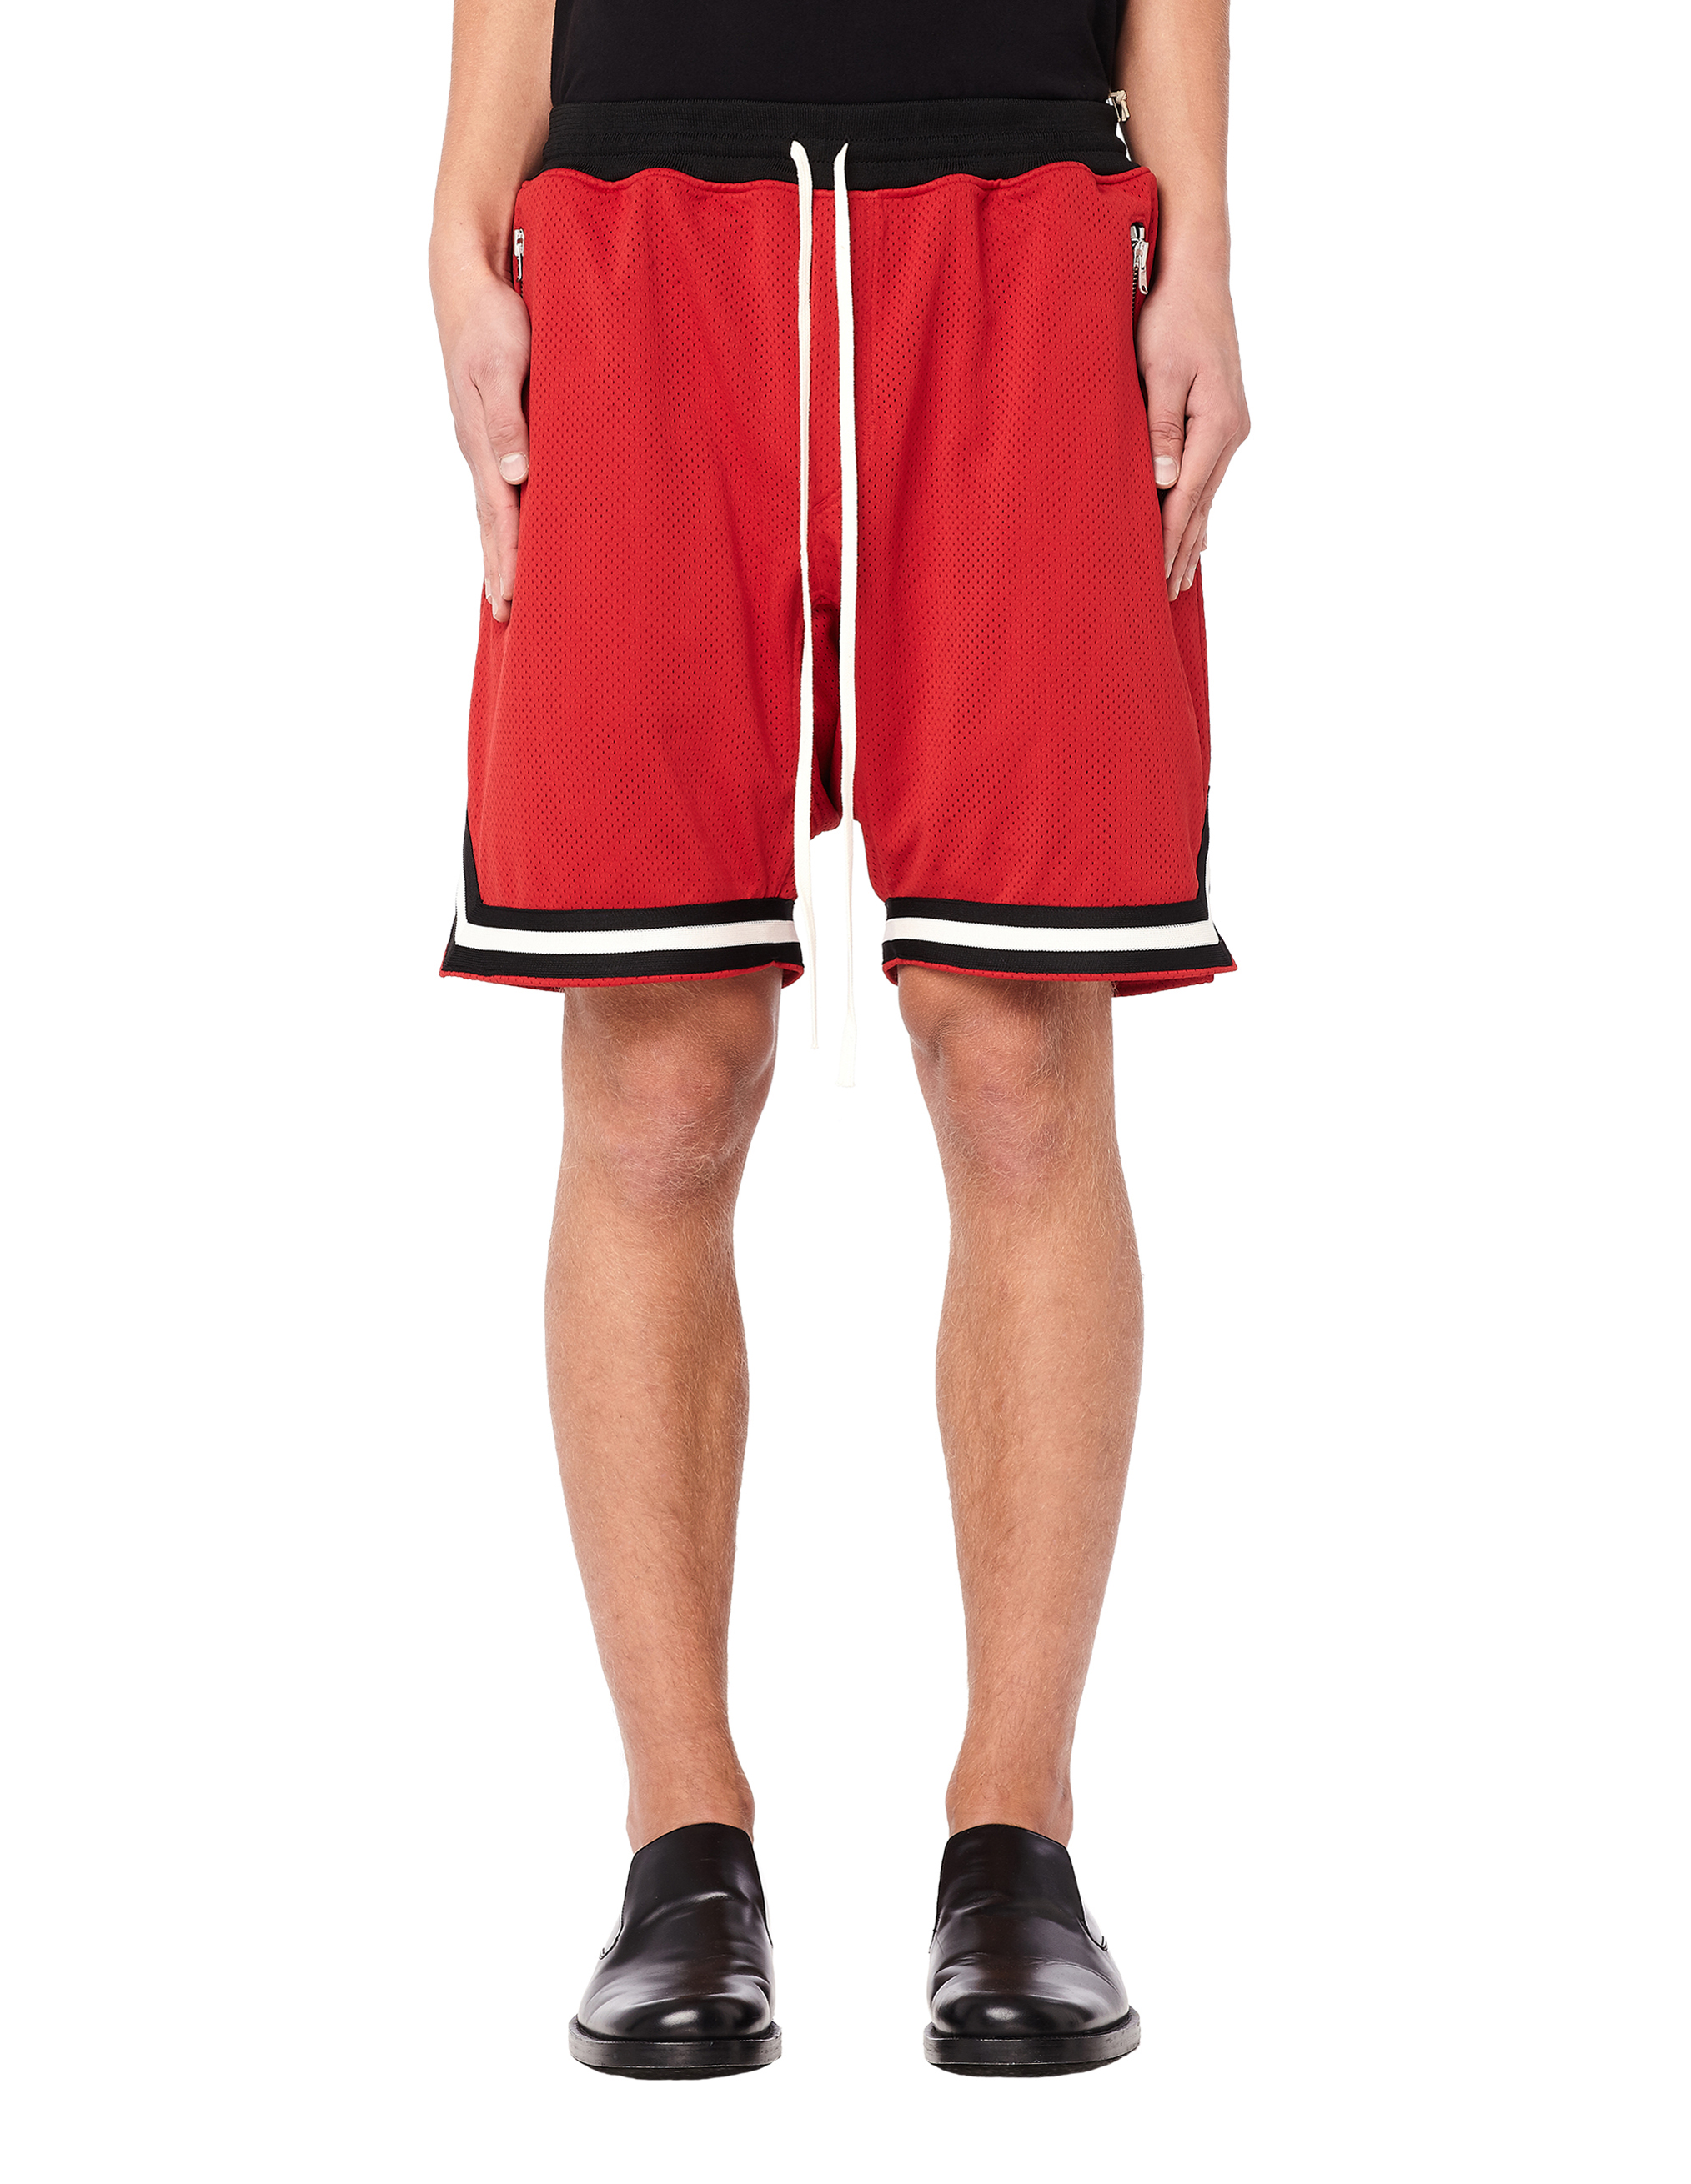 Fear of God Red Mesh Dropcrotch Shorts - Emanuel Cotton trousers